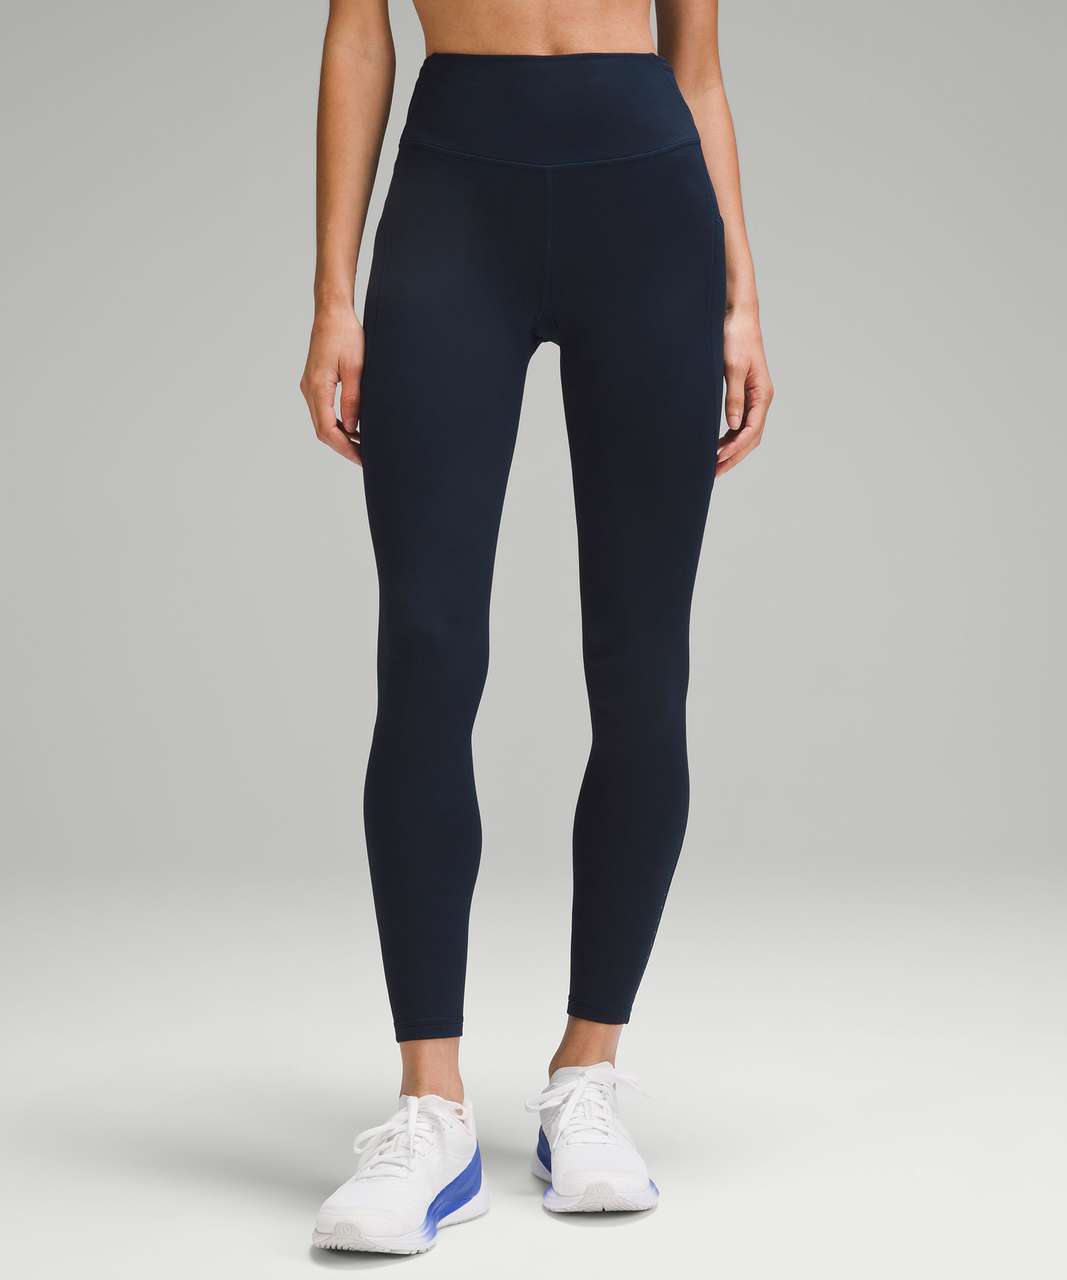 NWT Lululemon Fast Free HR Tight 25 LW5BXQS TRNV Navy Nulux Choose Size